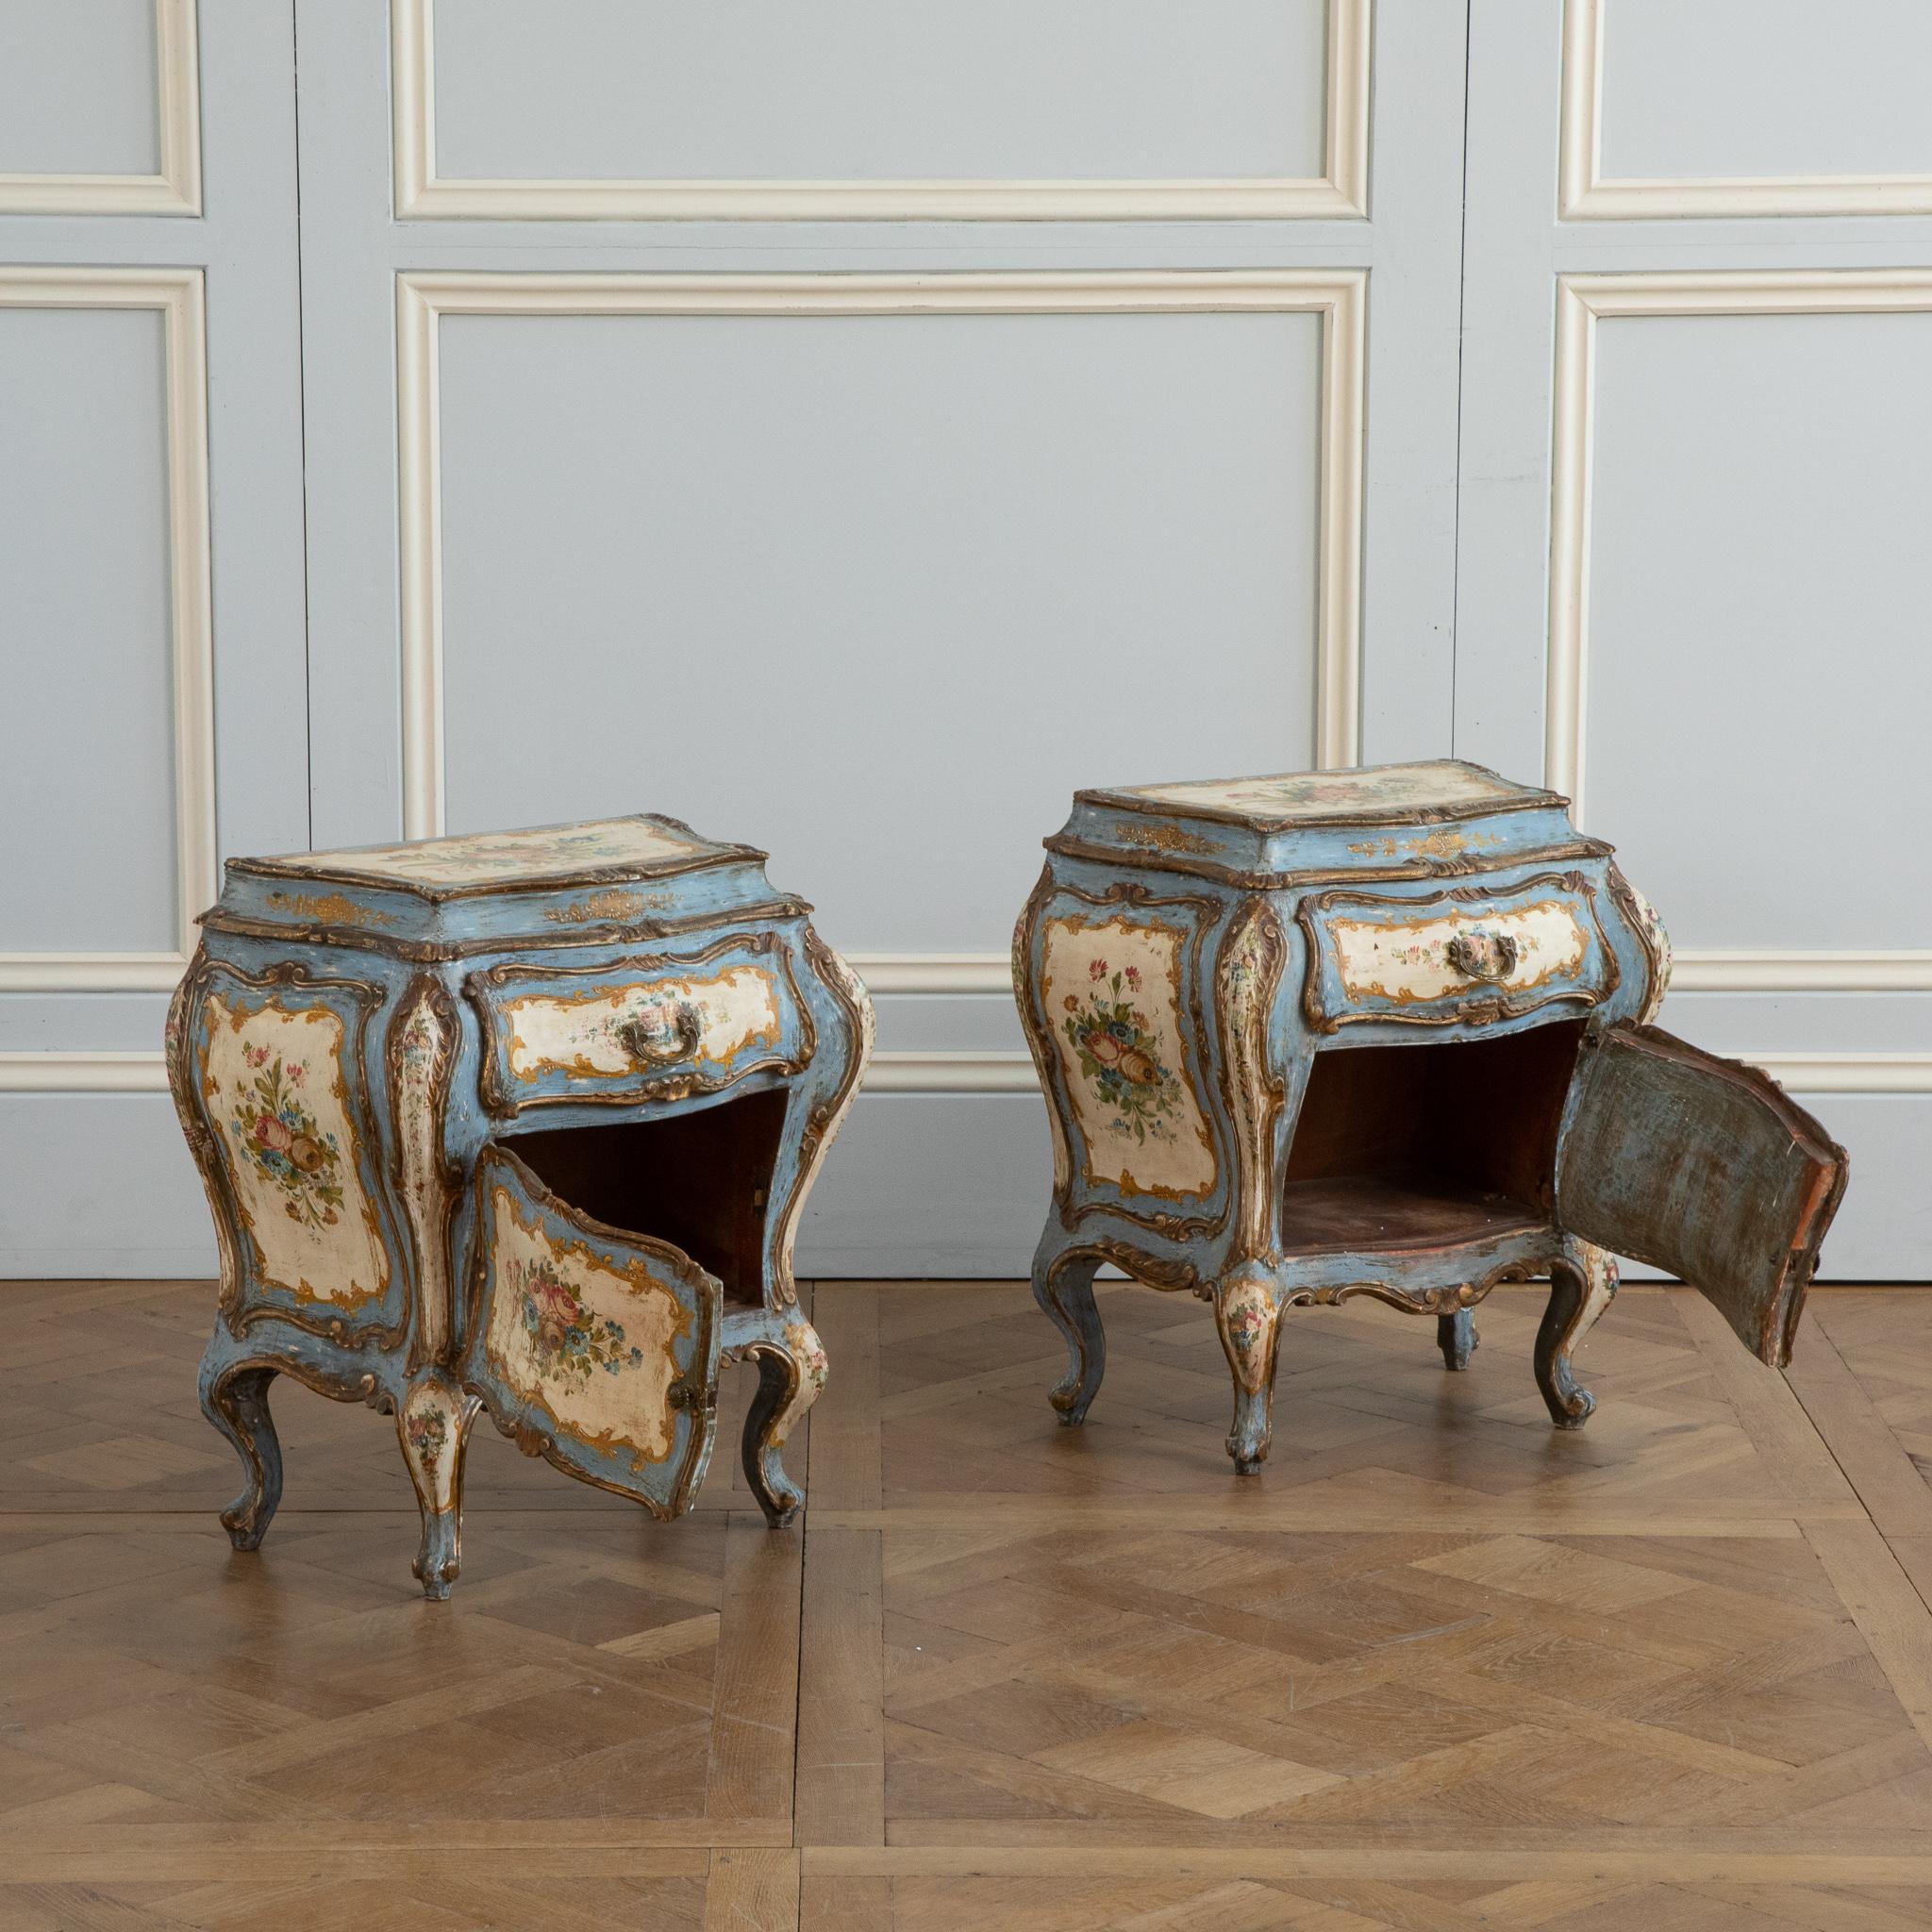 20th Century Pair of Florentine Rococo Bedside Tables 'Night Stands'